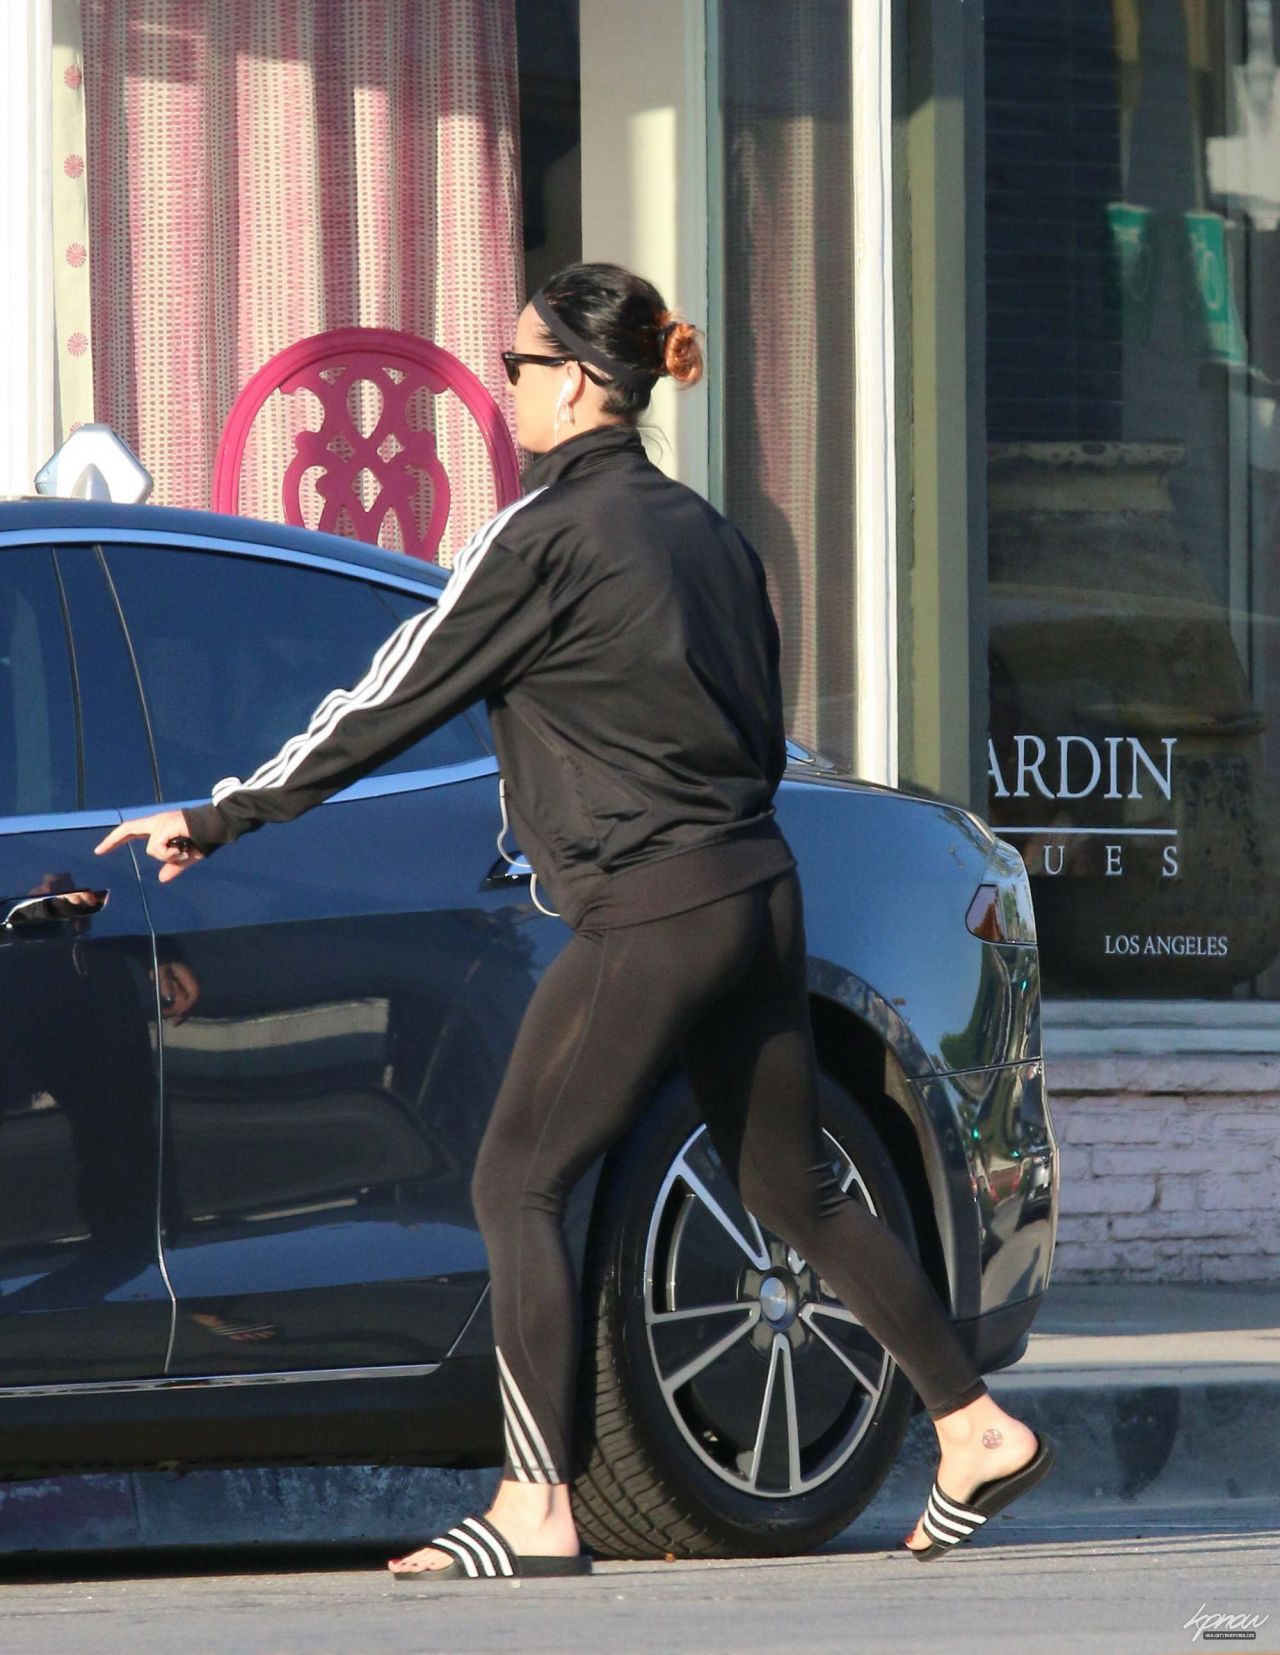 Katy Perry Booty in Tights - out in Los Angeles, Oct. 20141280 x 1655